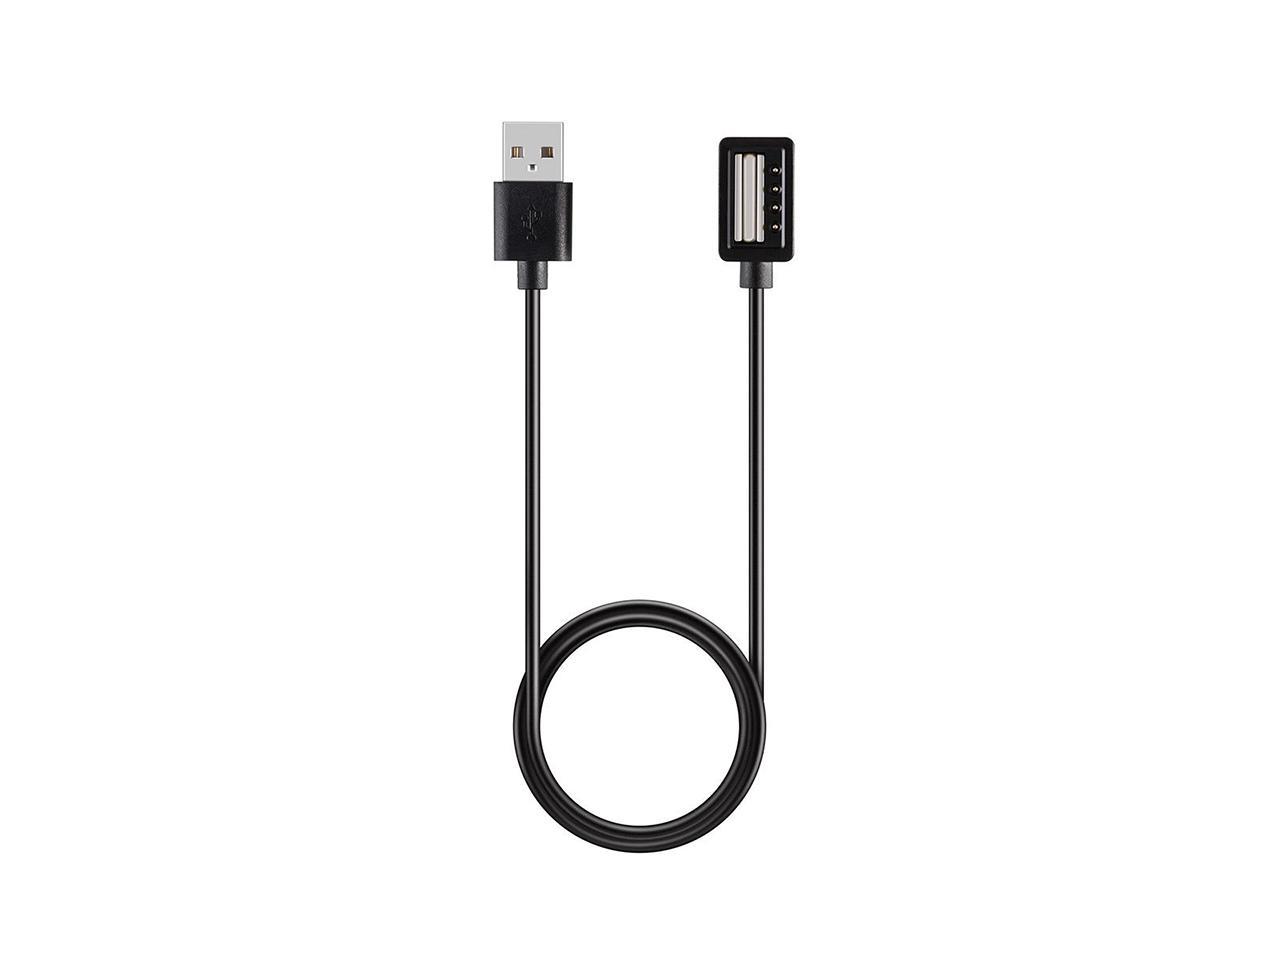 Universal USB Charging Cable Cradle Charger For SUUNTO SPARTAN Smart Watch Accessories